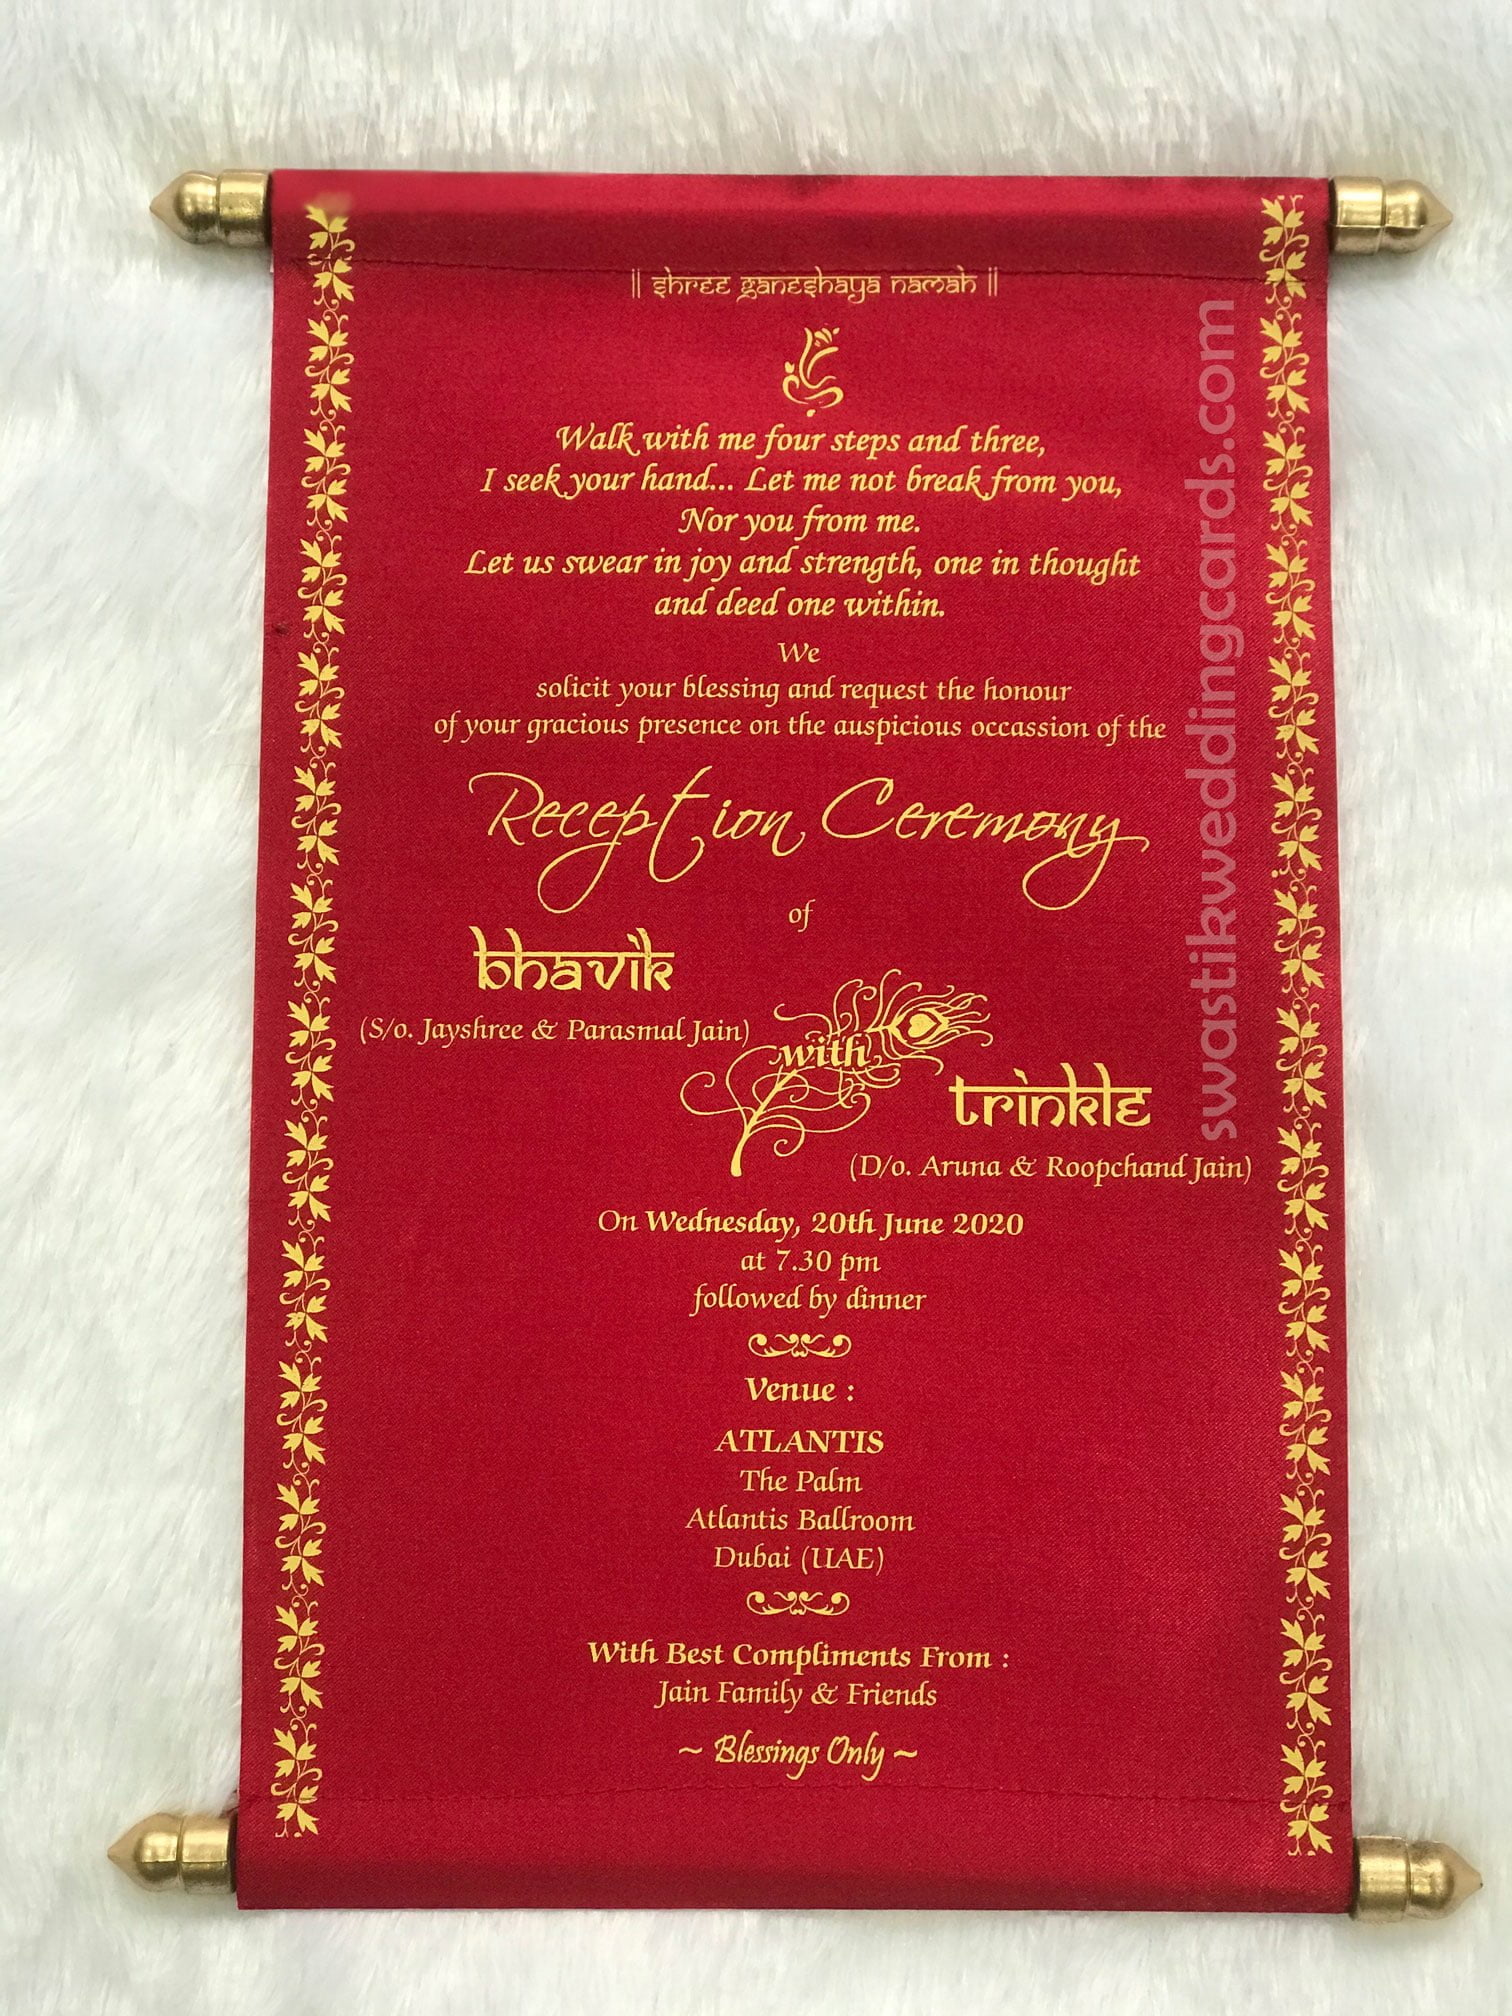 Satin(silk type material) scroll invitation and wedding card - Swastik Cards